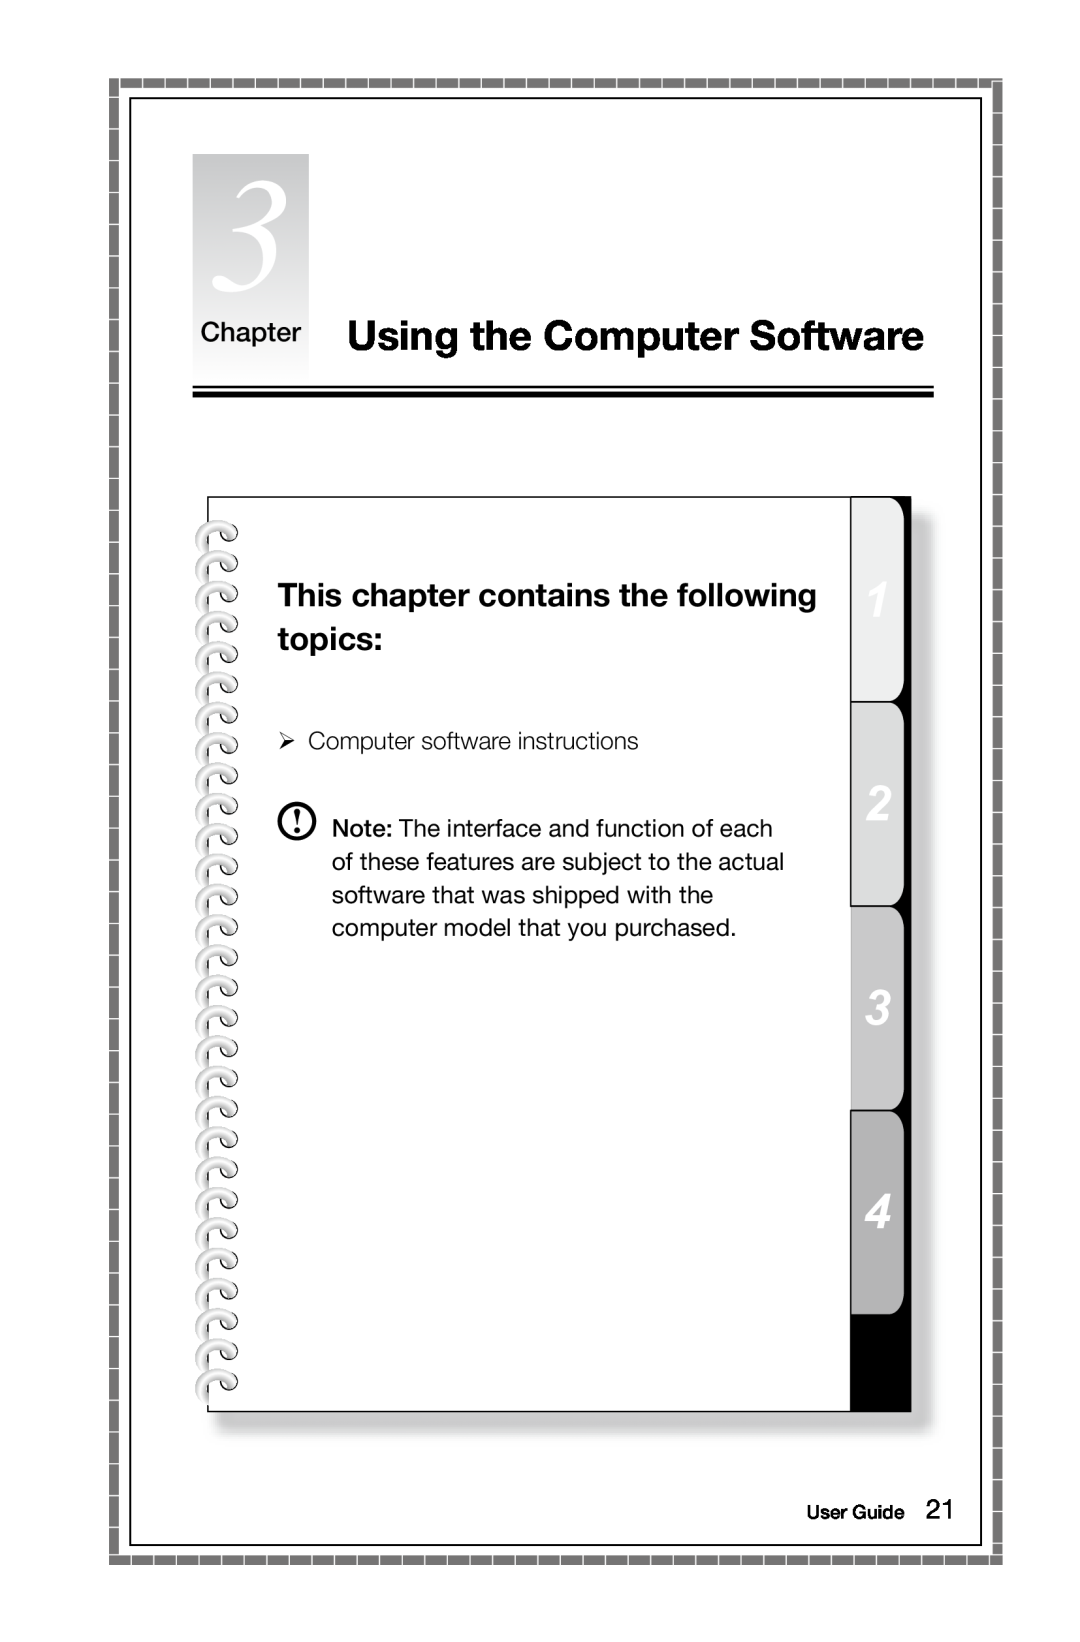 Lenovo 10066/7747, 10073/1169 Chapter Using the Computer Software, This chapter contains the following topics, User Guide 